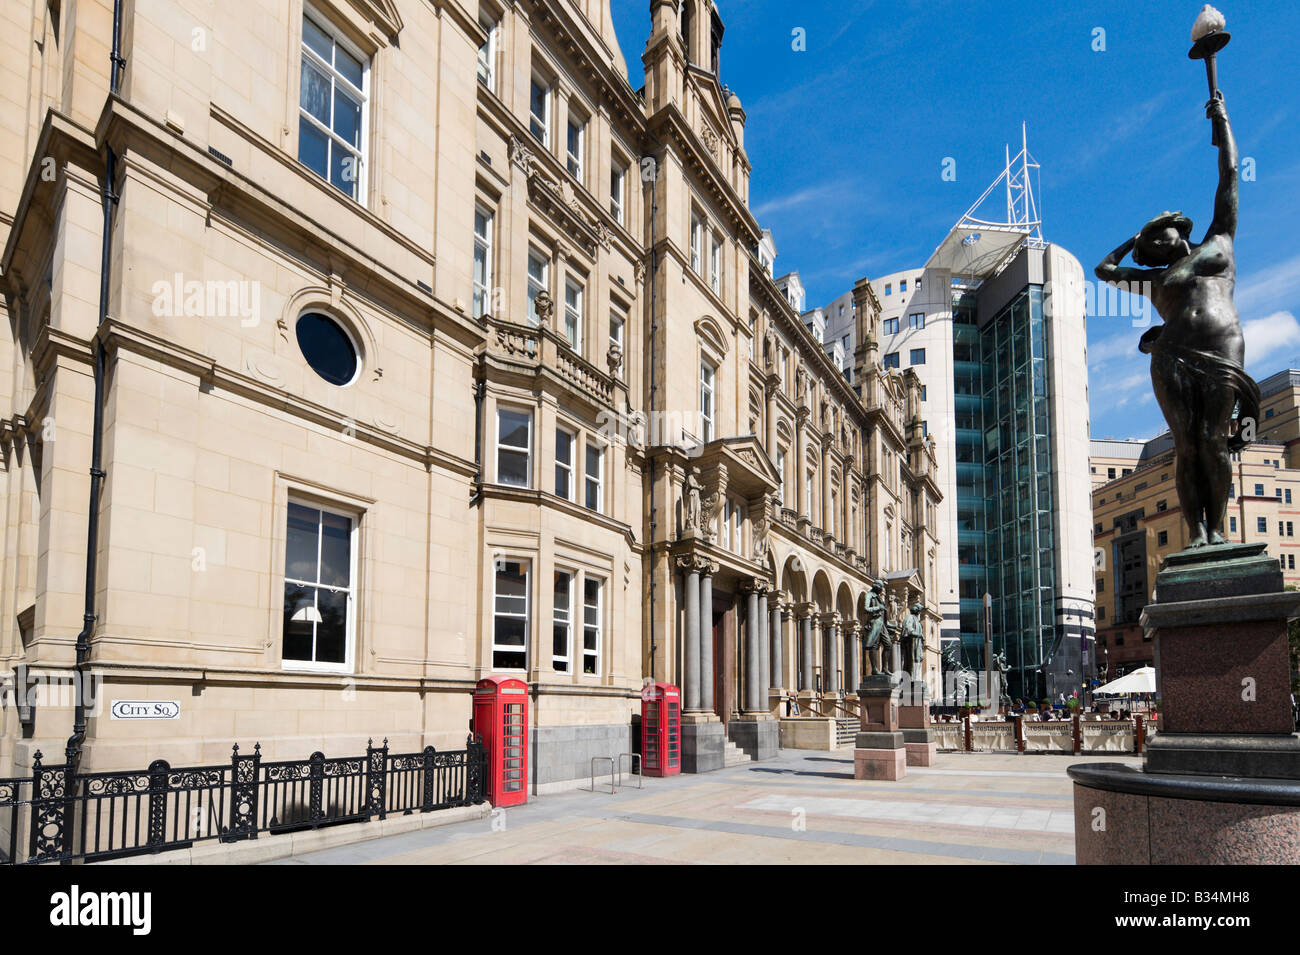 The Old Post Office containing The Restaurant Bar and Grill, City Square, Leeds, West Yorkshire, England Stock Photo